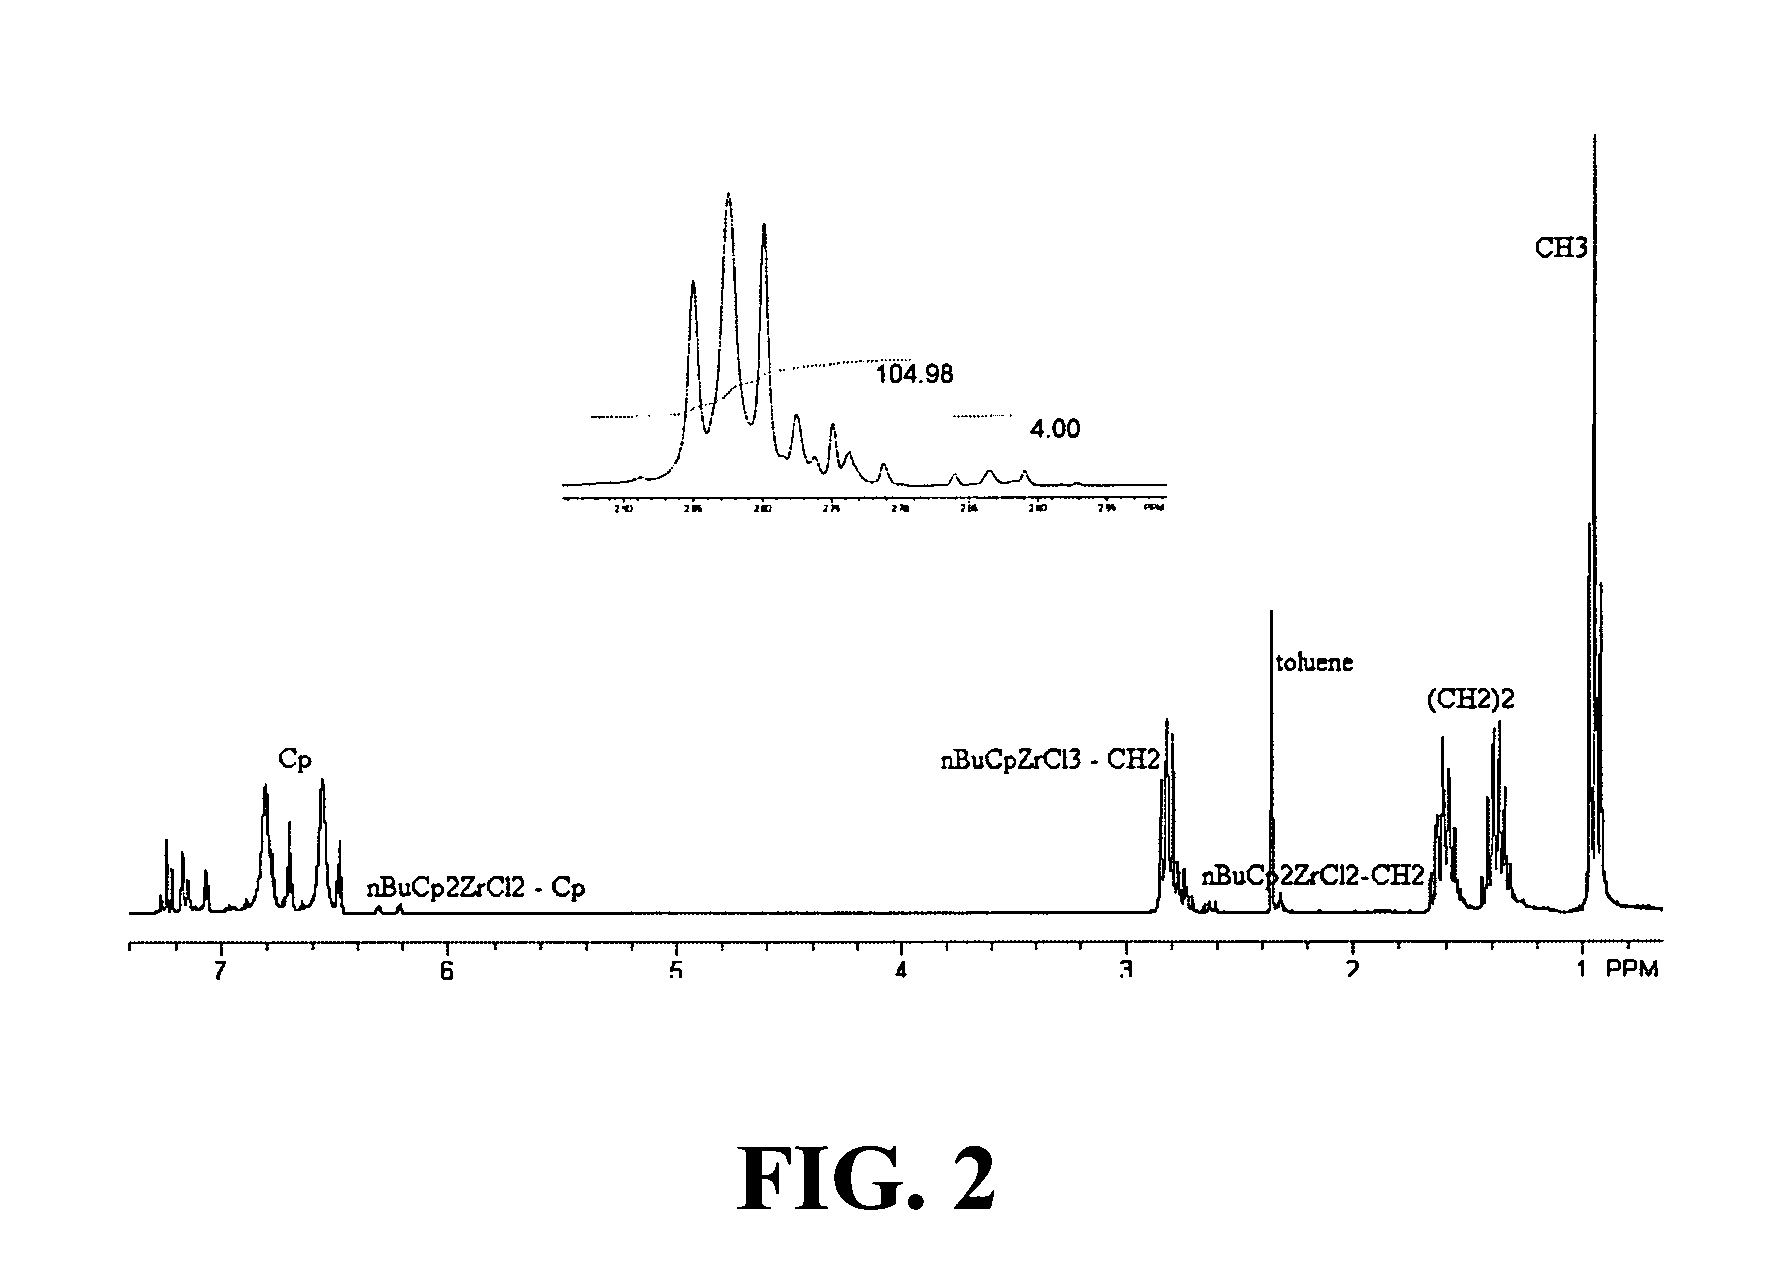 Polymerization catalysts and process for producing bimodal polymers in a single reactor